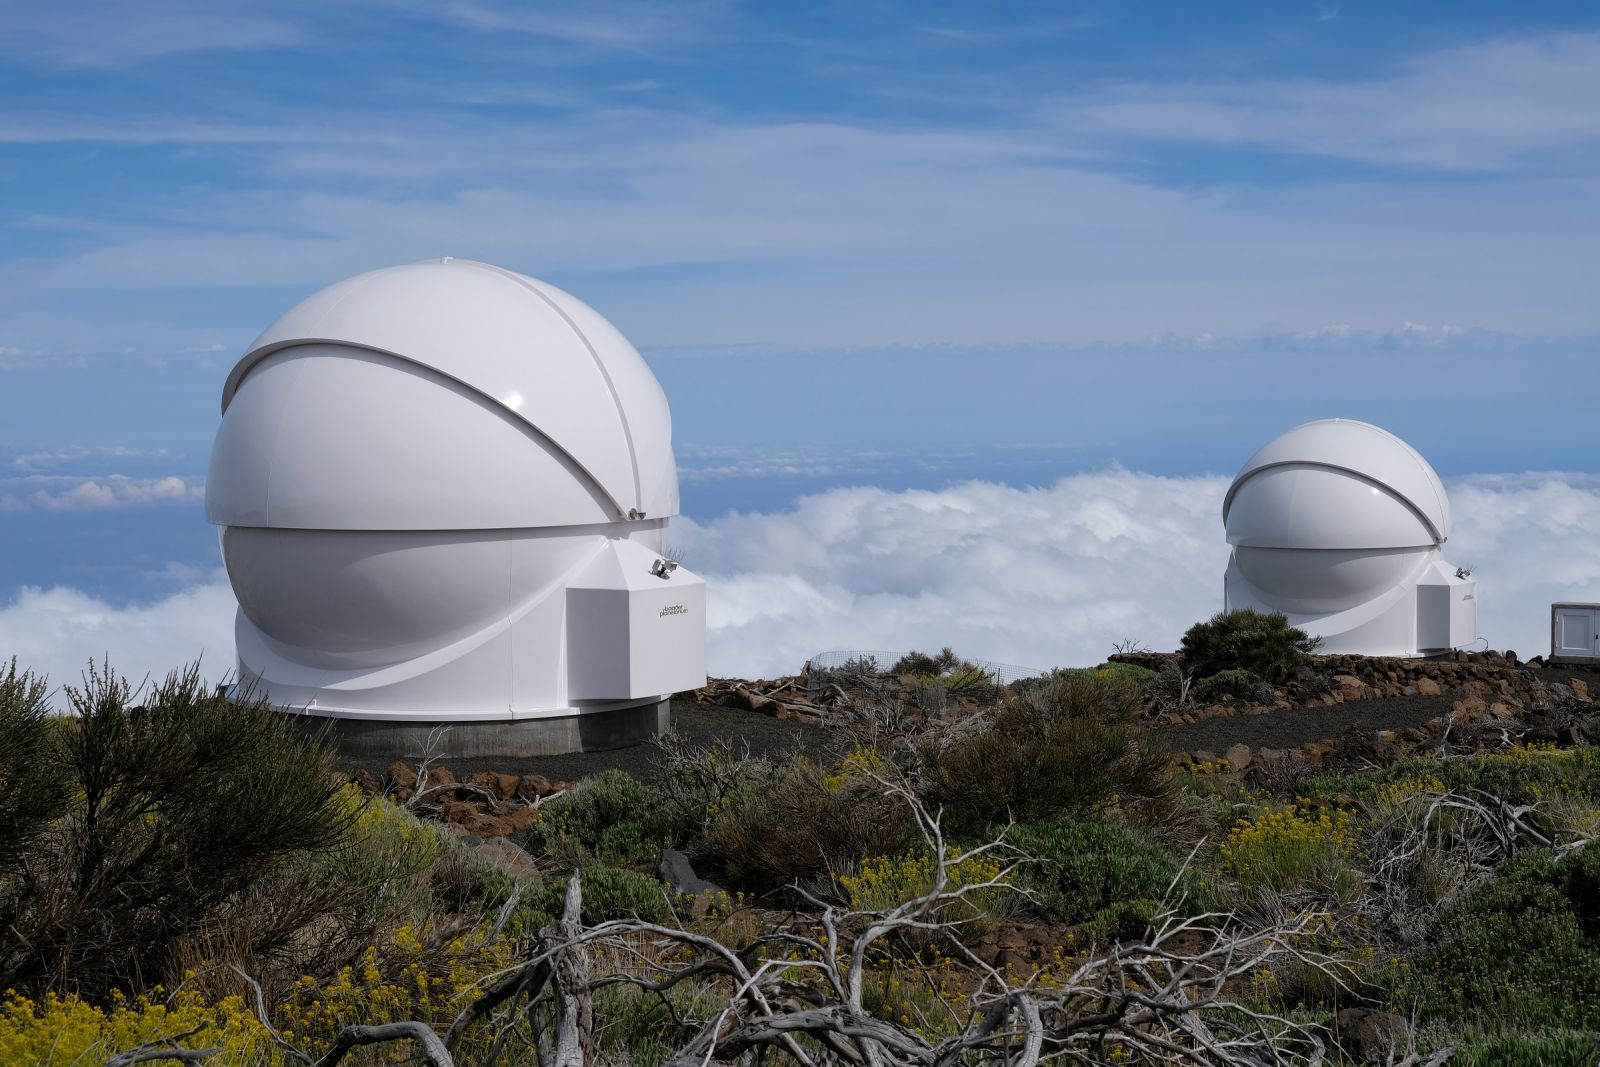 Robotic and remotely-controlled telescopes